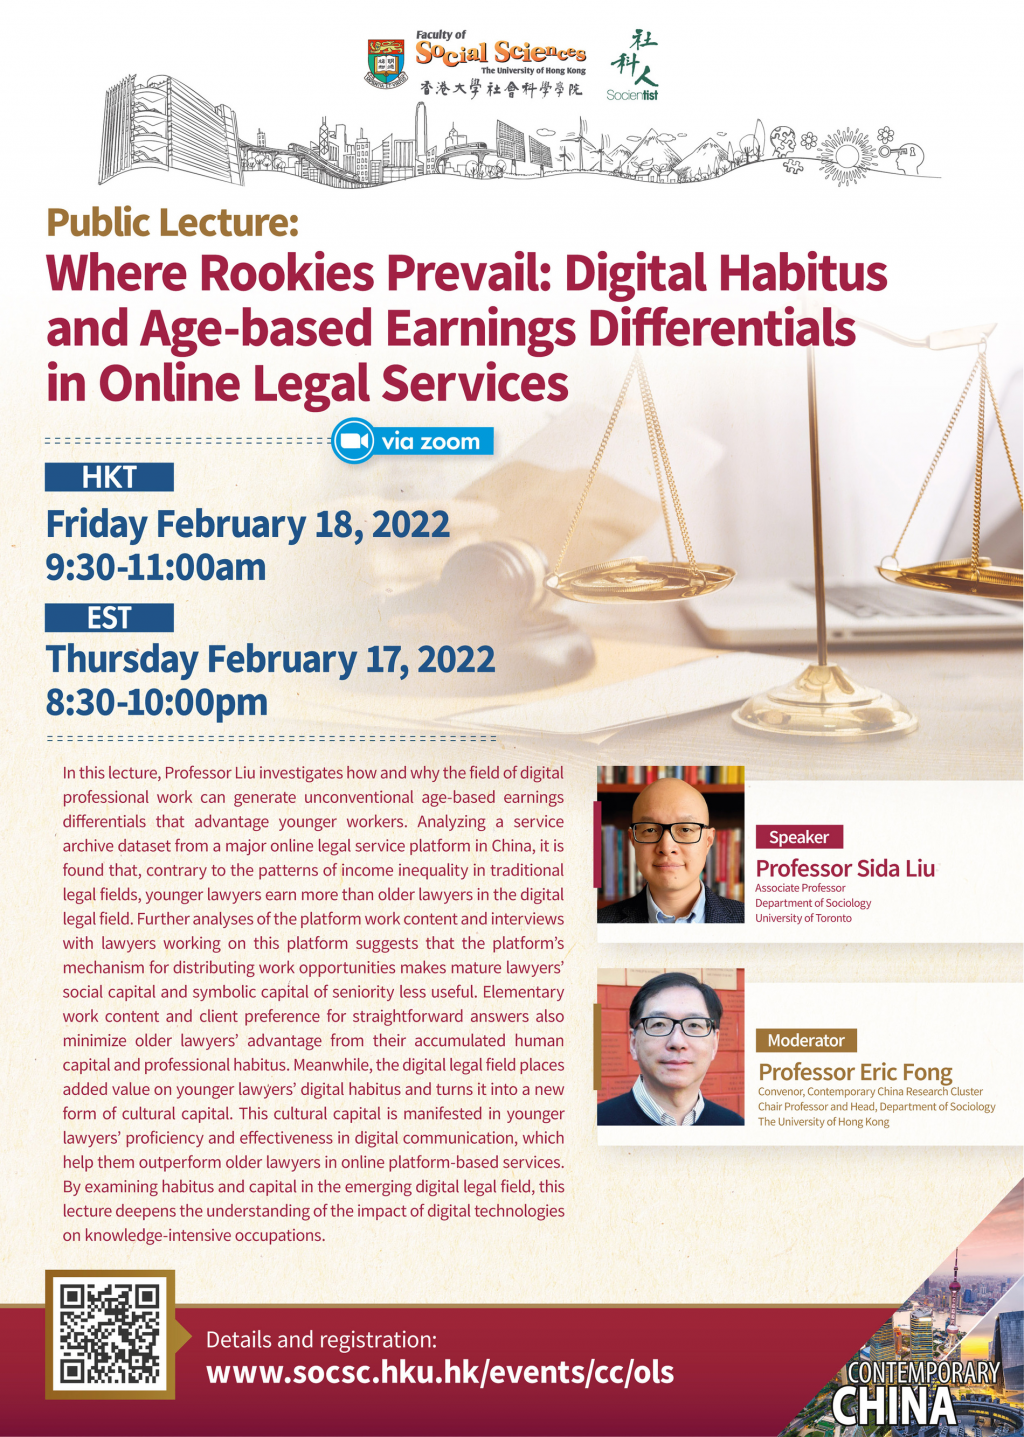 Where Rookies Prevail: Digital Habitus and Age-based Earnings Differentials in Online Legal Services (February 18, 9:30am)